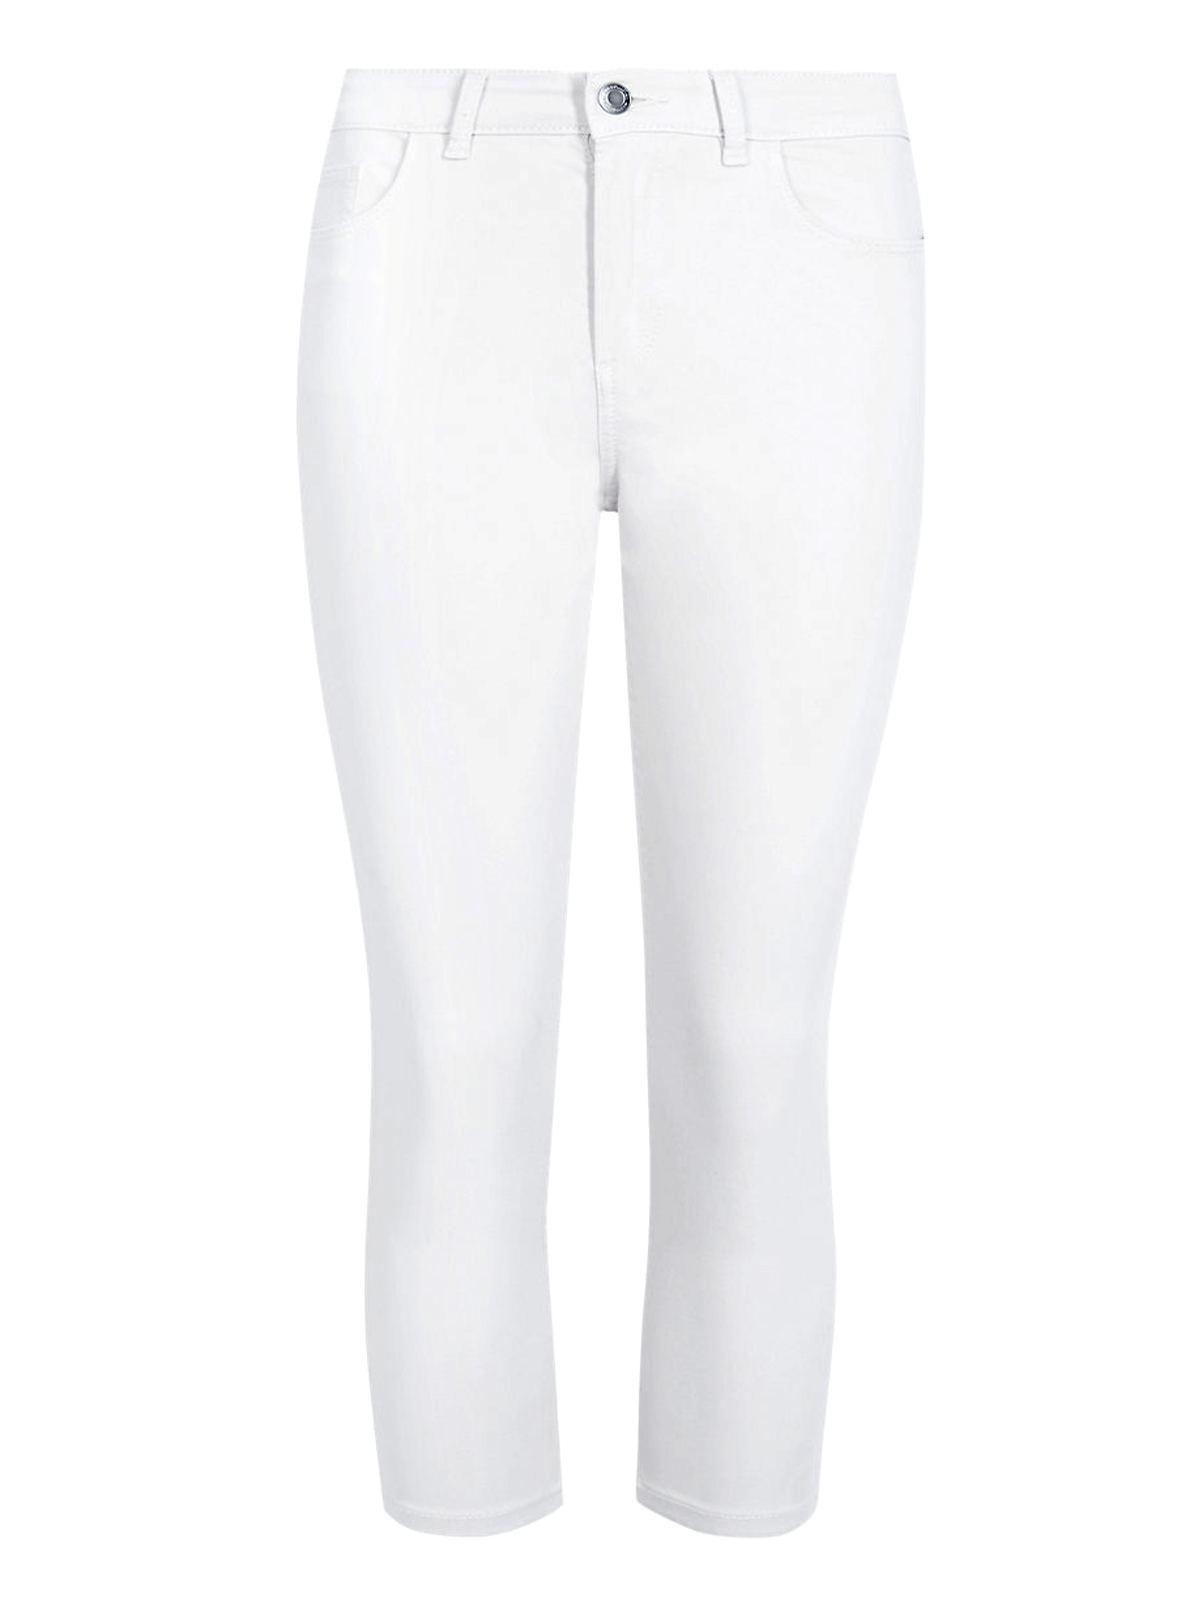 m&s super skinny cropped jeans